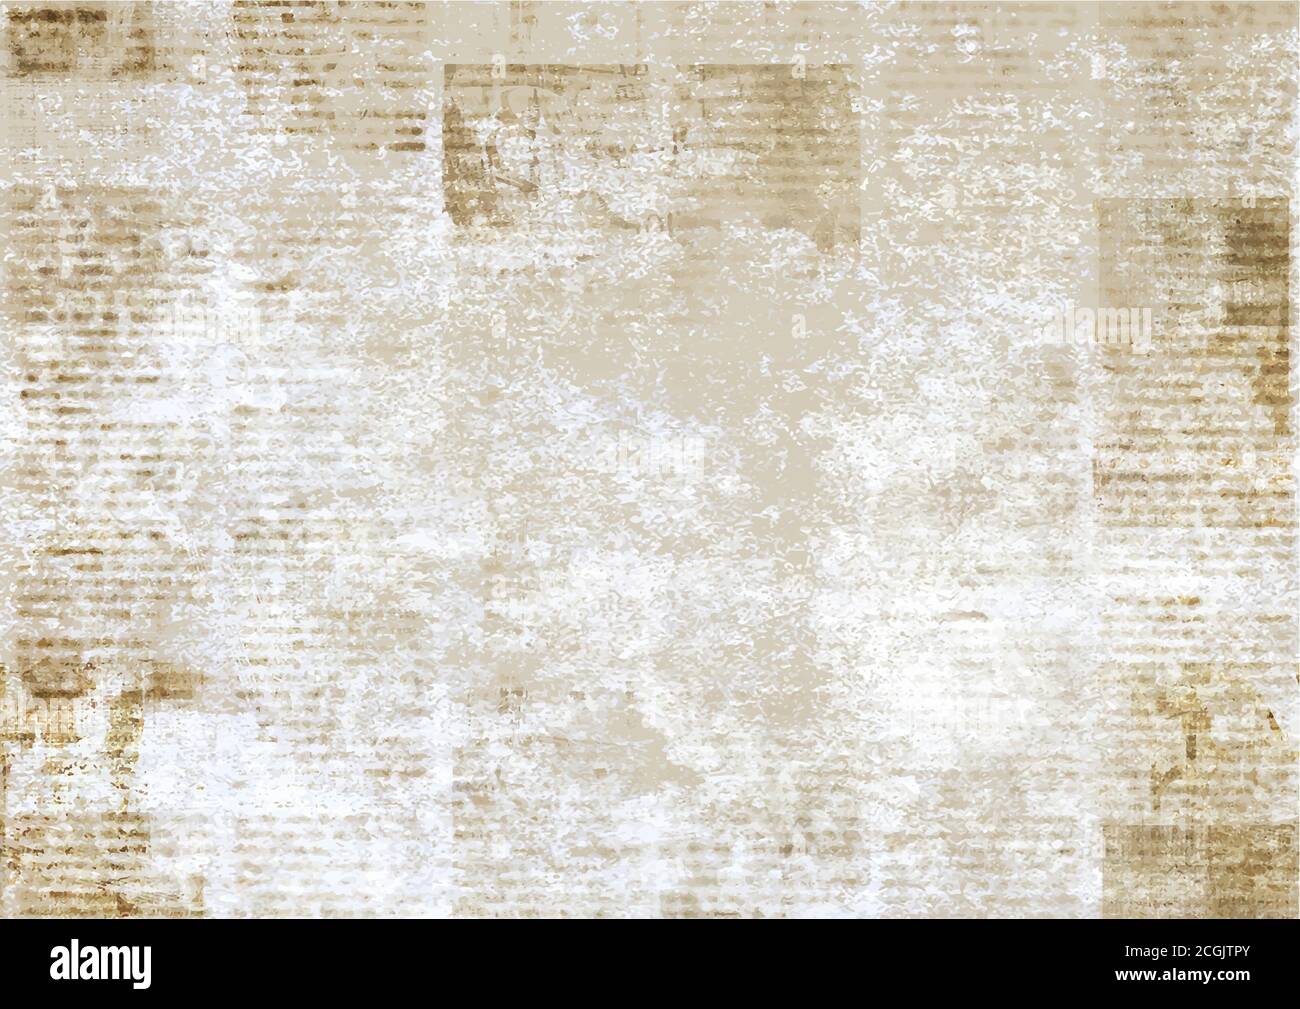 Old Grunge Newspaper Paper Texture Background. Blurred Vintage Newspaper  Background. Scratched Paper Textured Page With Place For Text Or Image.  Gray Brown Beige Collage News Paper Background. Stock Photo, Picture and  Royalty